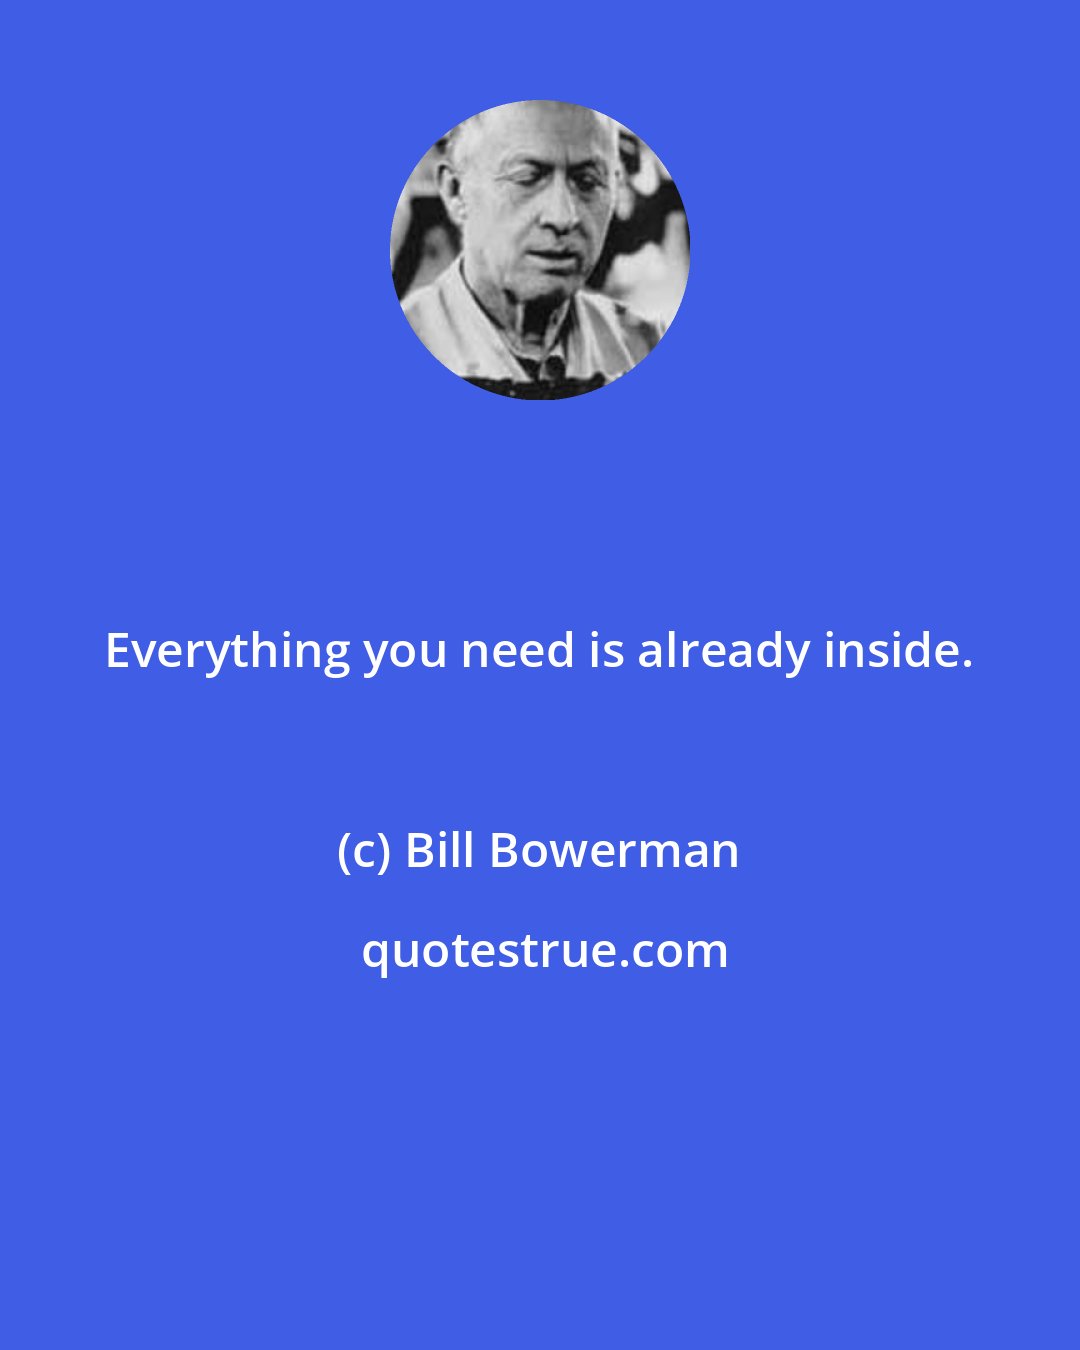 Bill Bowerman: Everything you need is already inside.